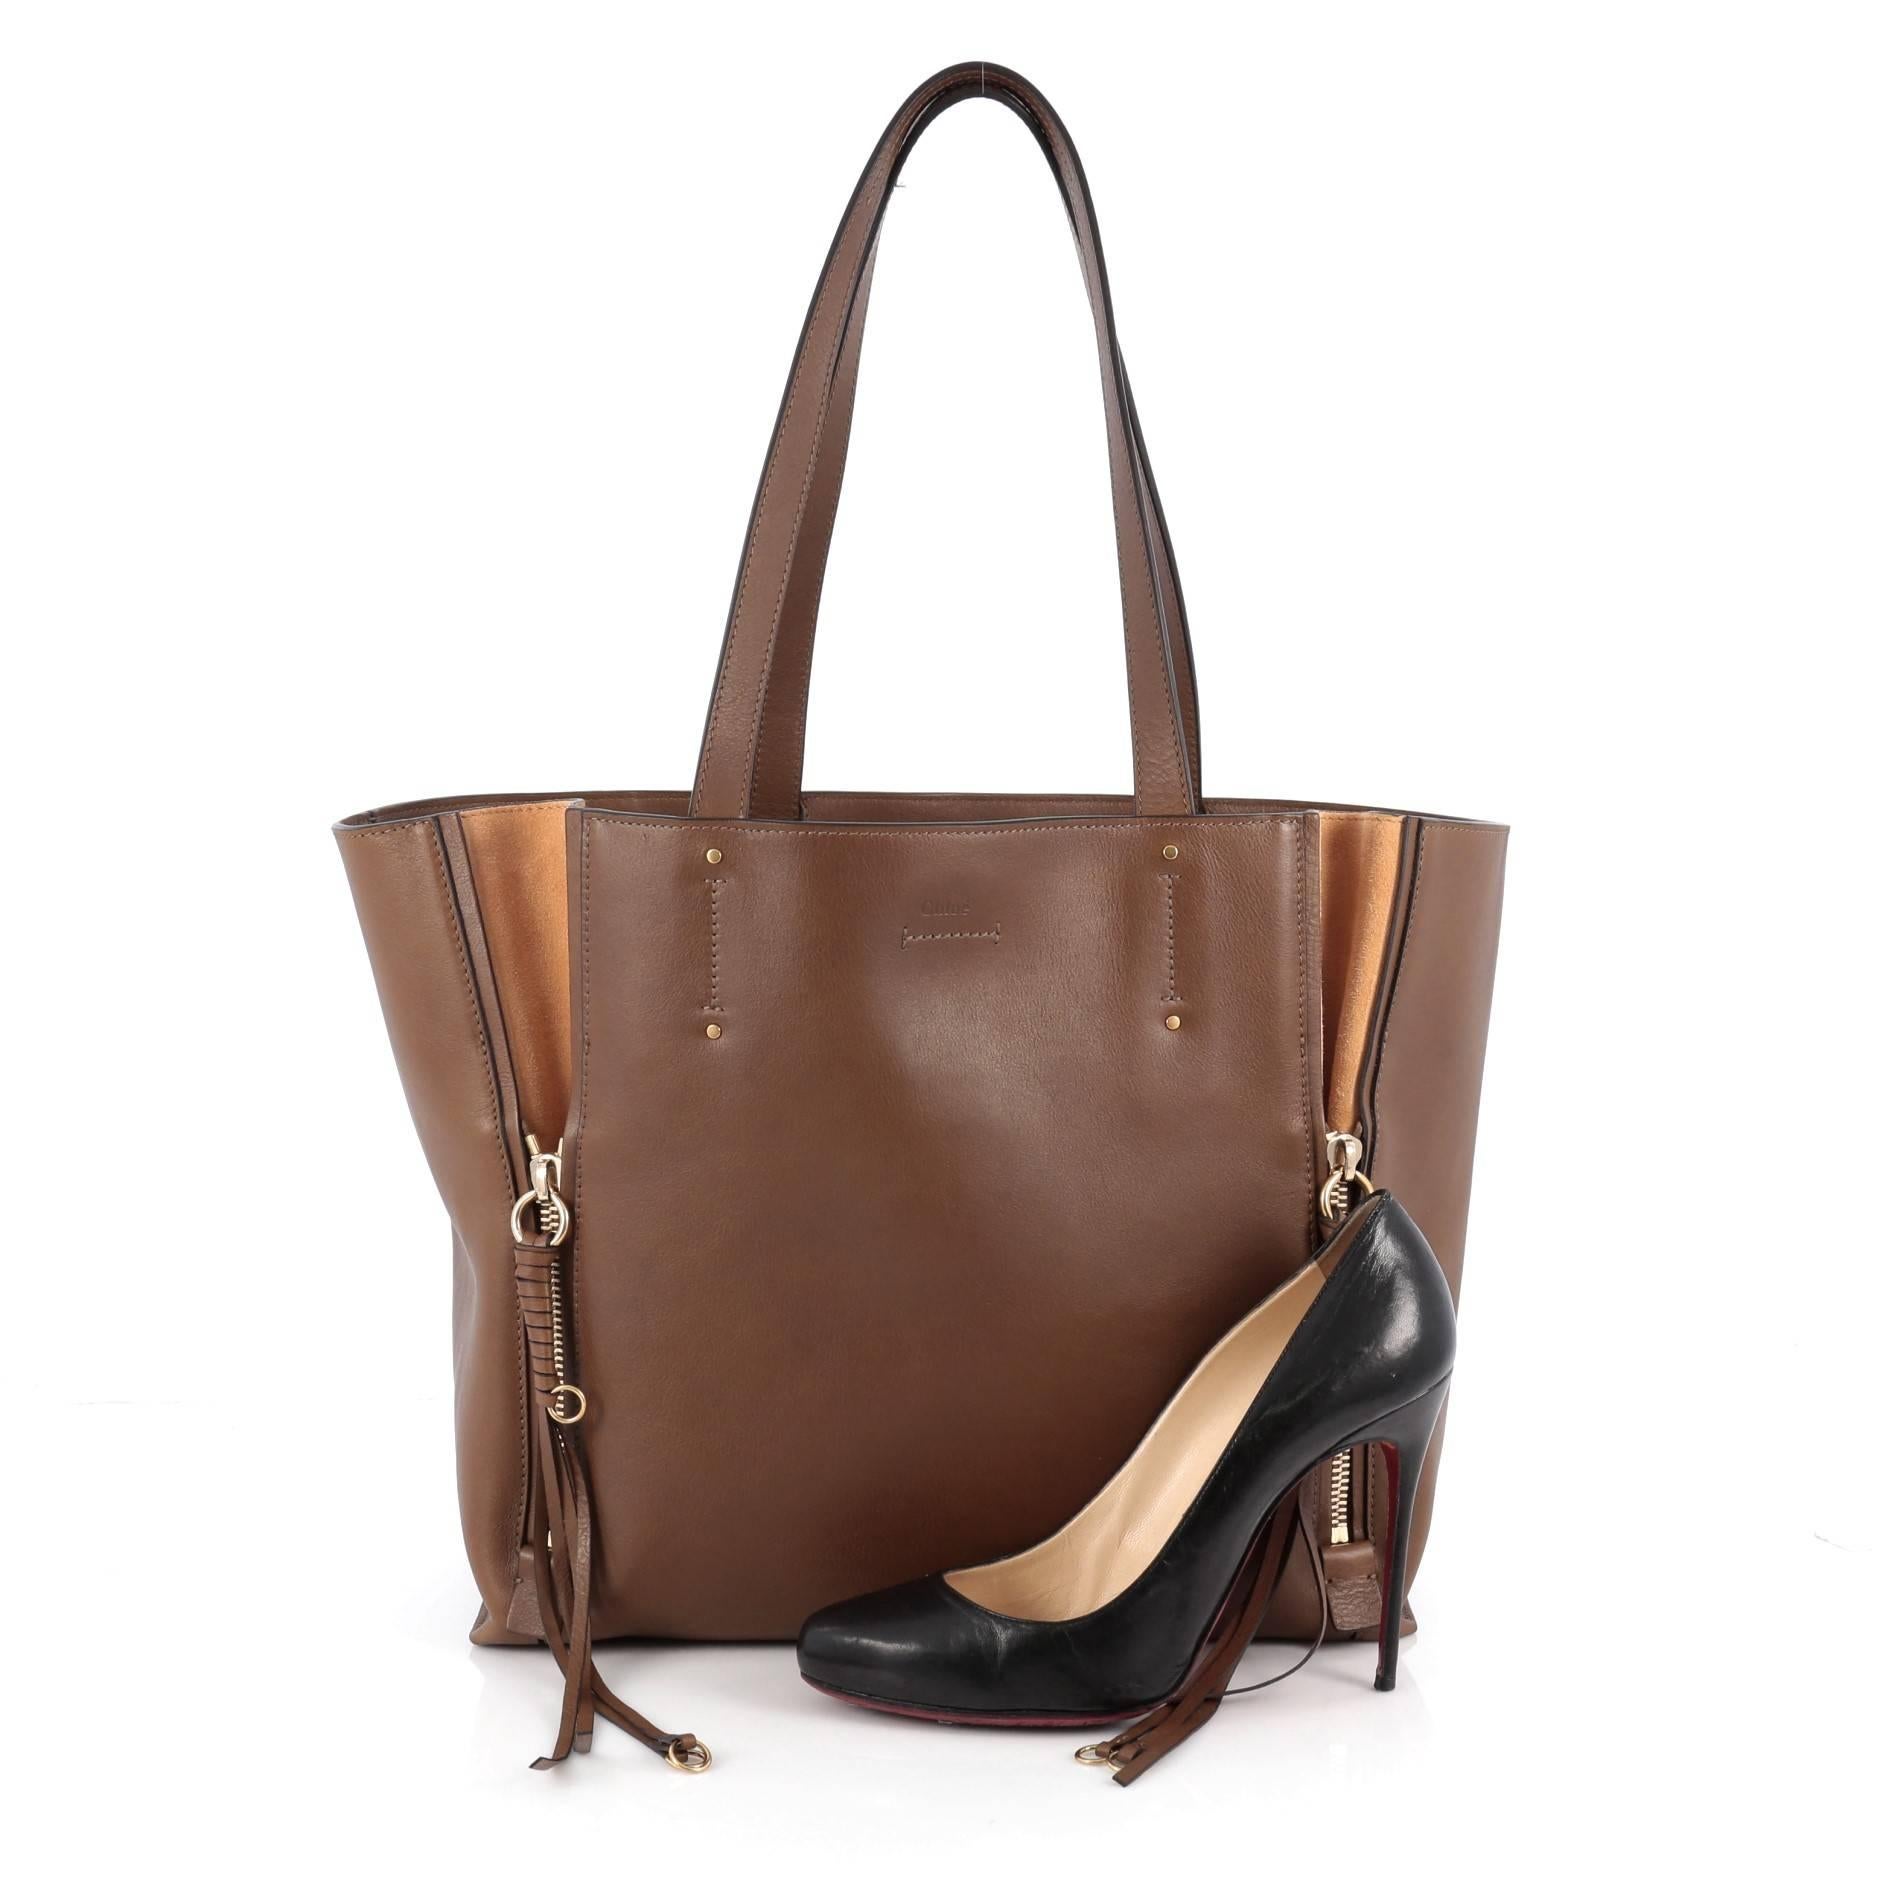 This authentic Chloe Milo Shopping Tote Leather Medium is a perfect bag for everyday excursions that's fresh and contemporary for the new season. Crafted from brown leather, this stylish bag features dual flat top handles, contrast suede gussets and